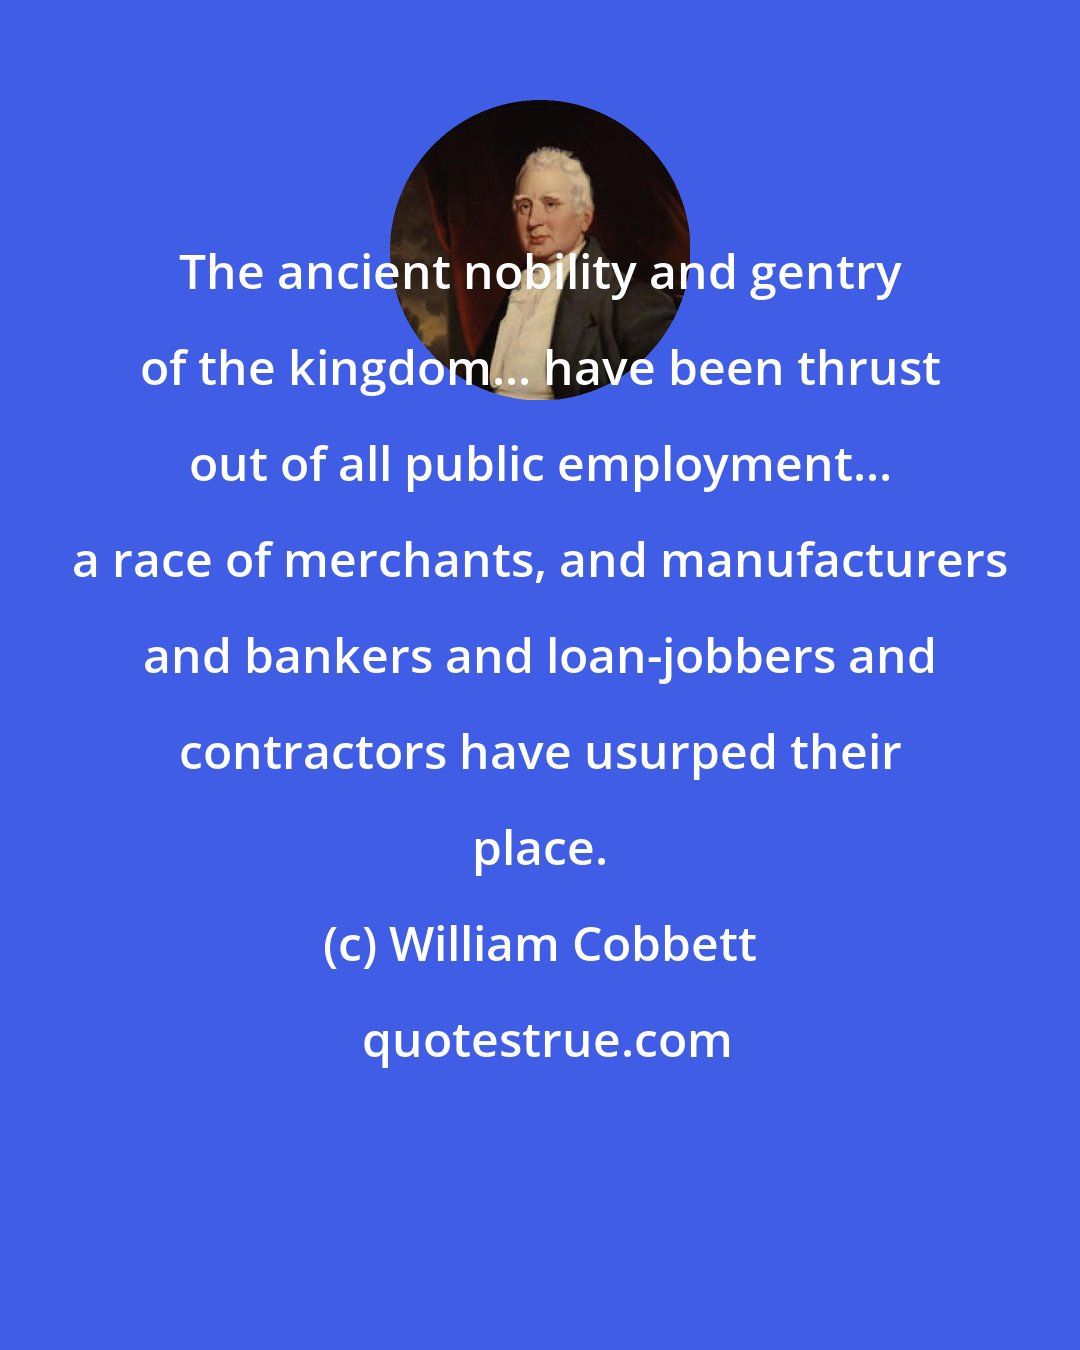 William Cobbett: The ancient nobility and gentry of the kingdom... have been thrust out of all public employment... a race of merchants, and manufacturers and bankers and loan-jobbers and contractors have usurped their place.